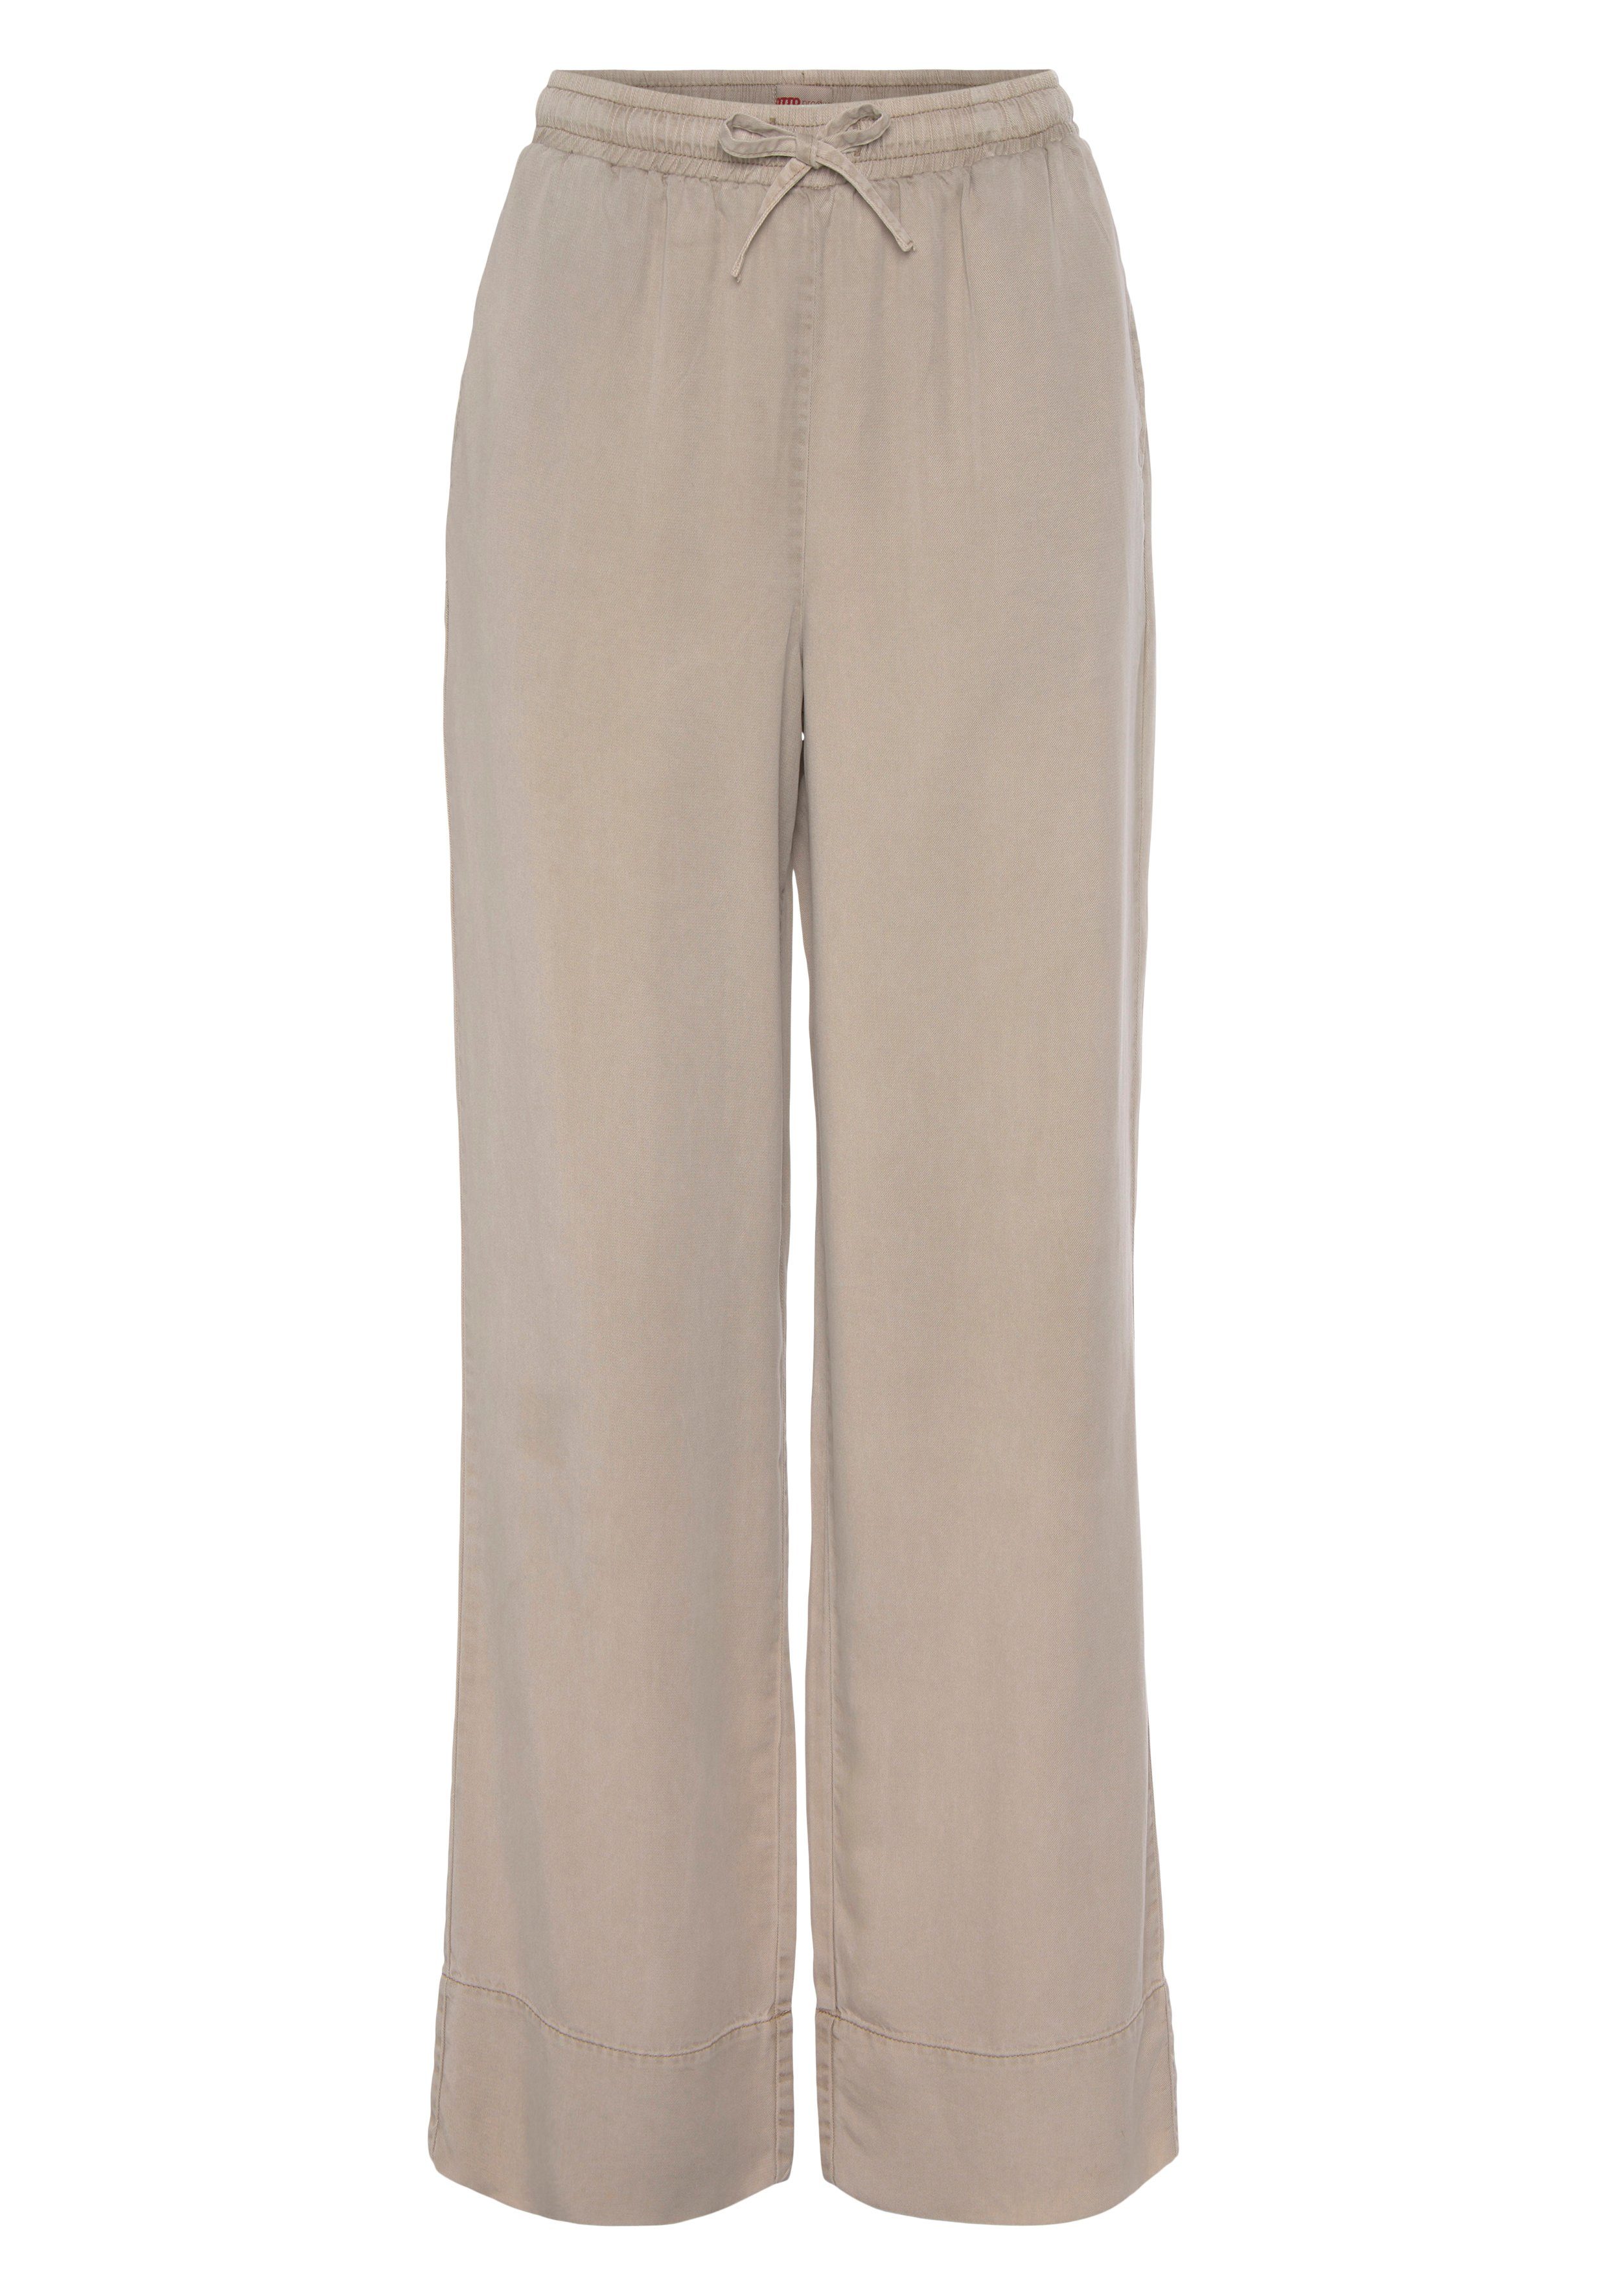 Marlene-Hose CIRCULAR beige products COLLECTION OTTO